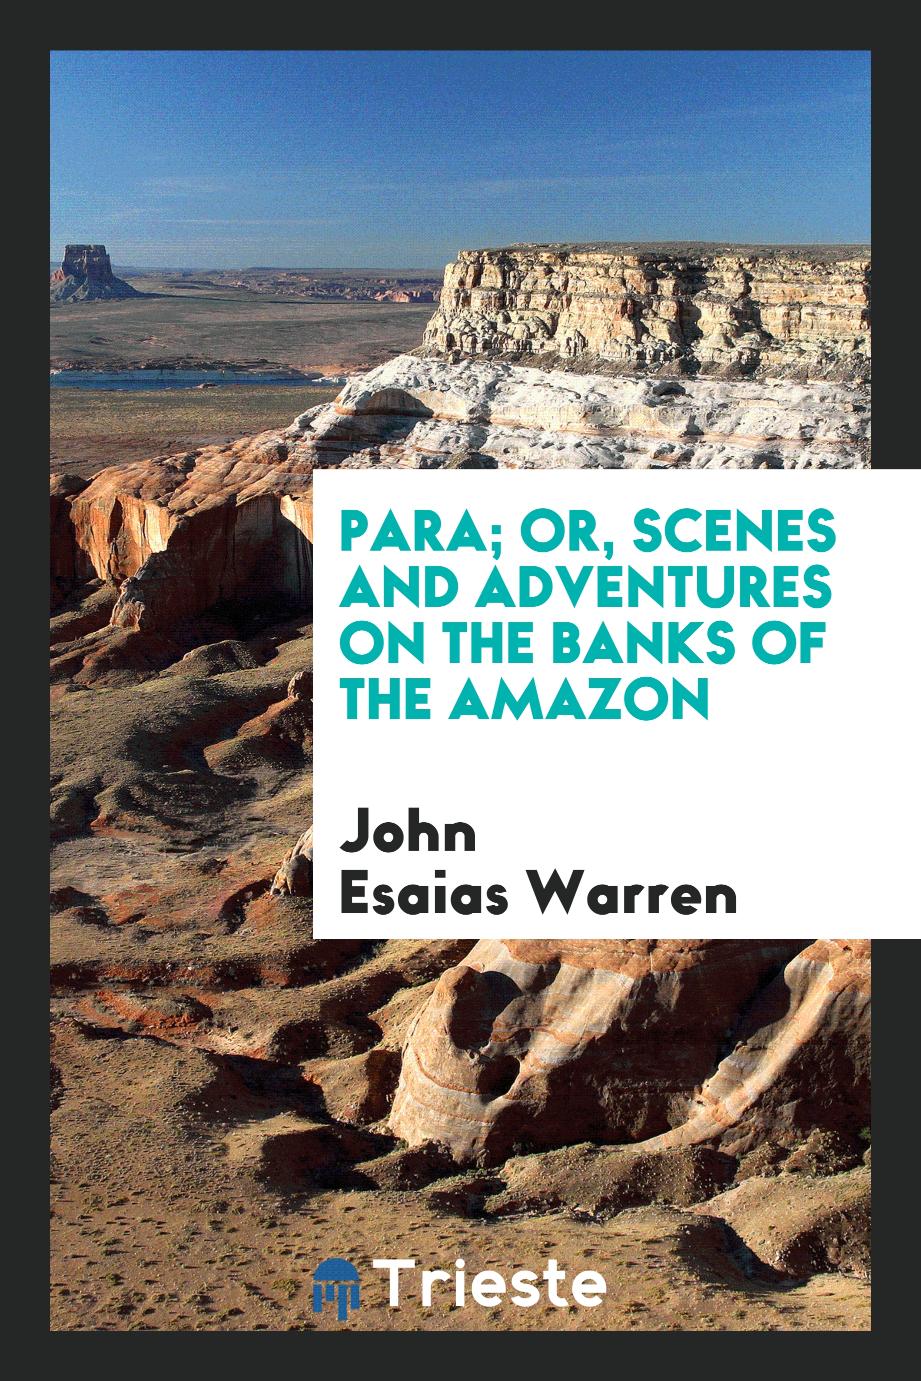 Para; or, Scenes and adventures on the banks of the Amazon